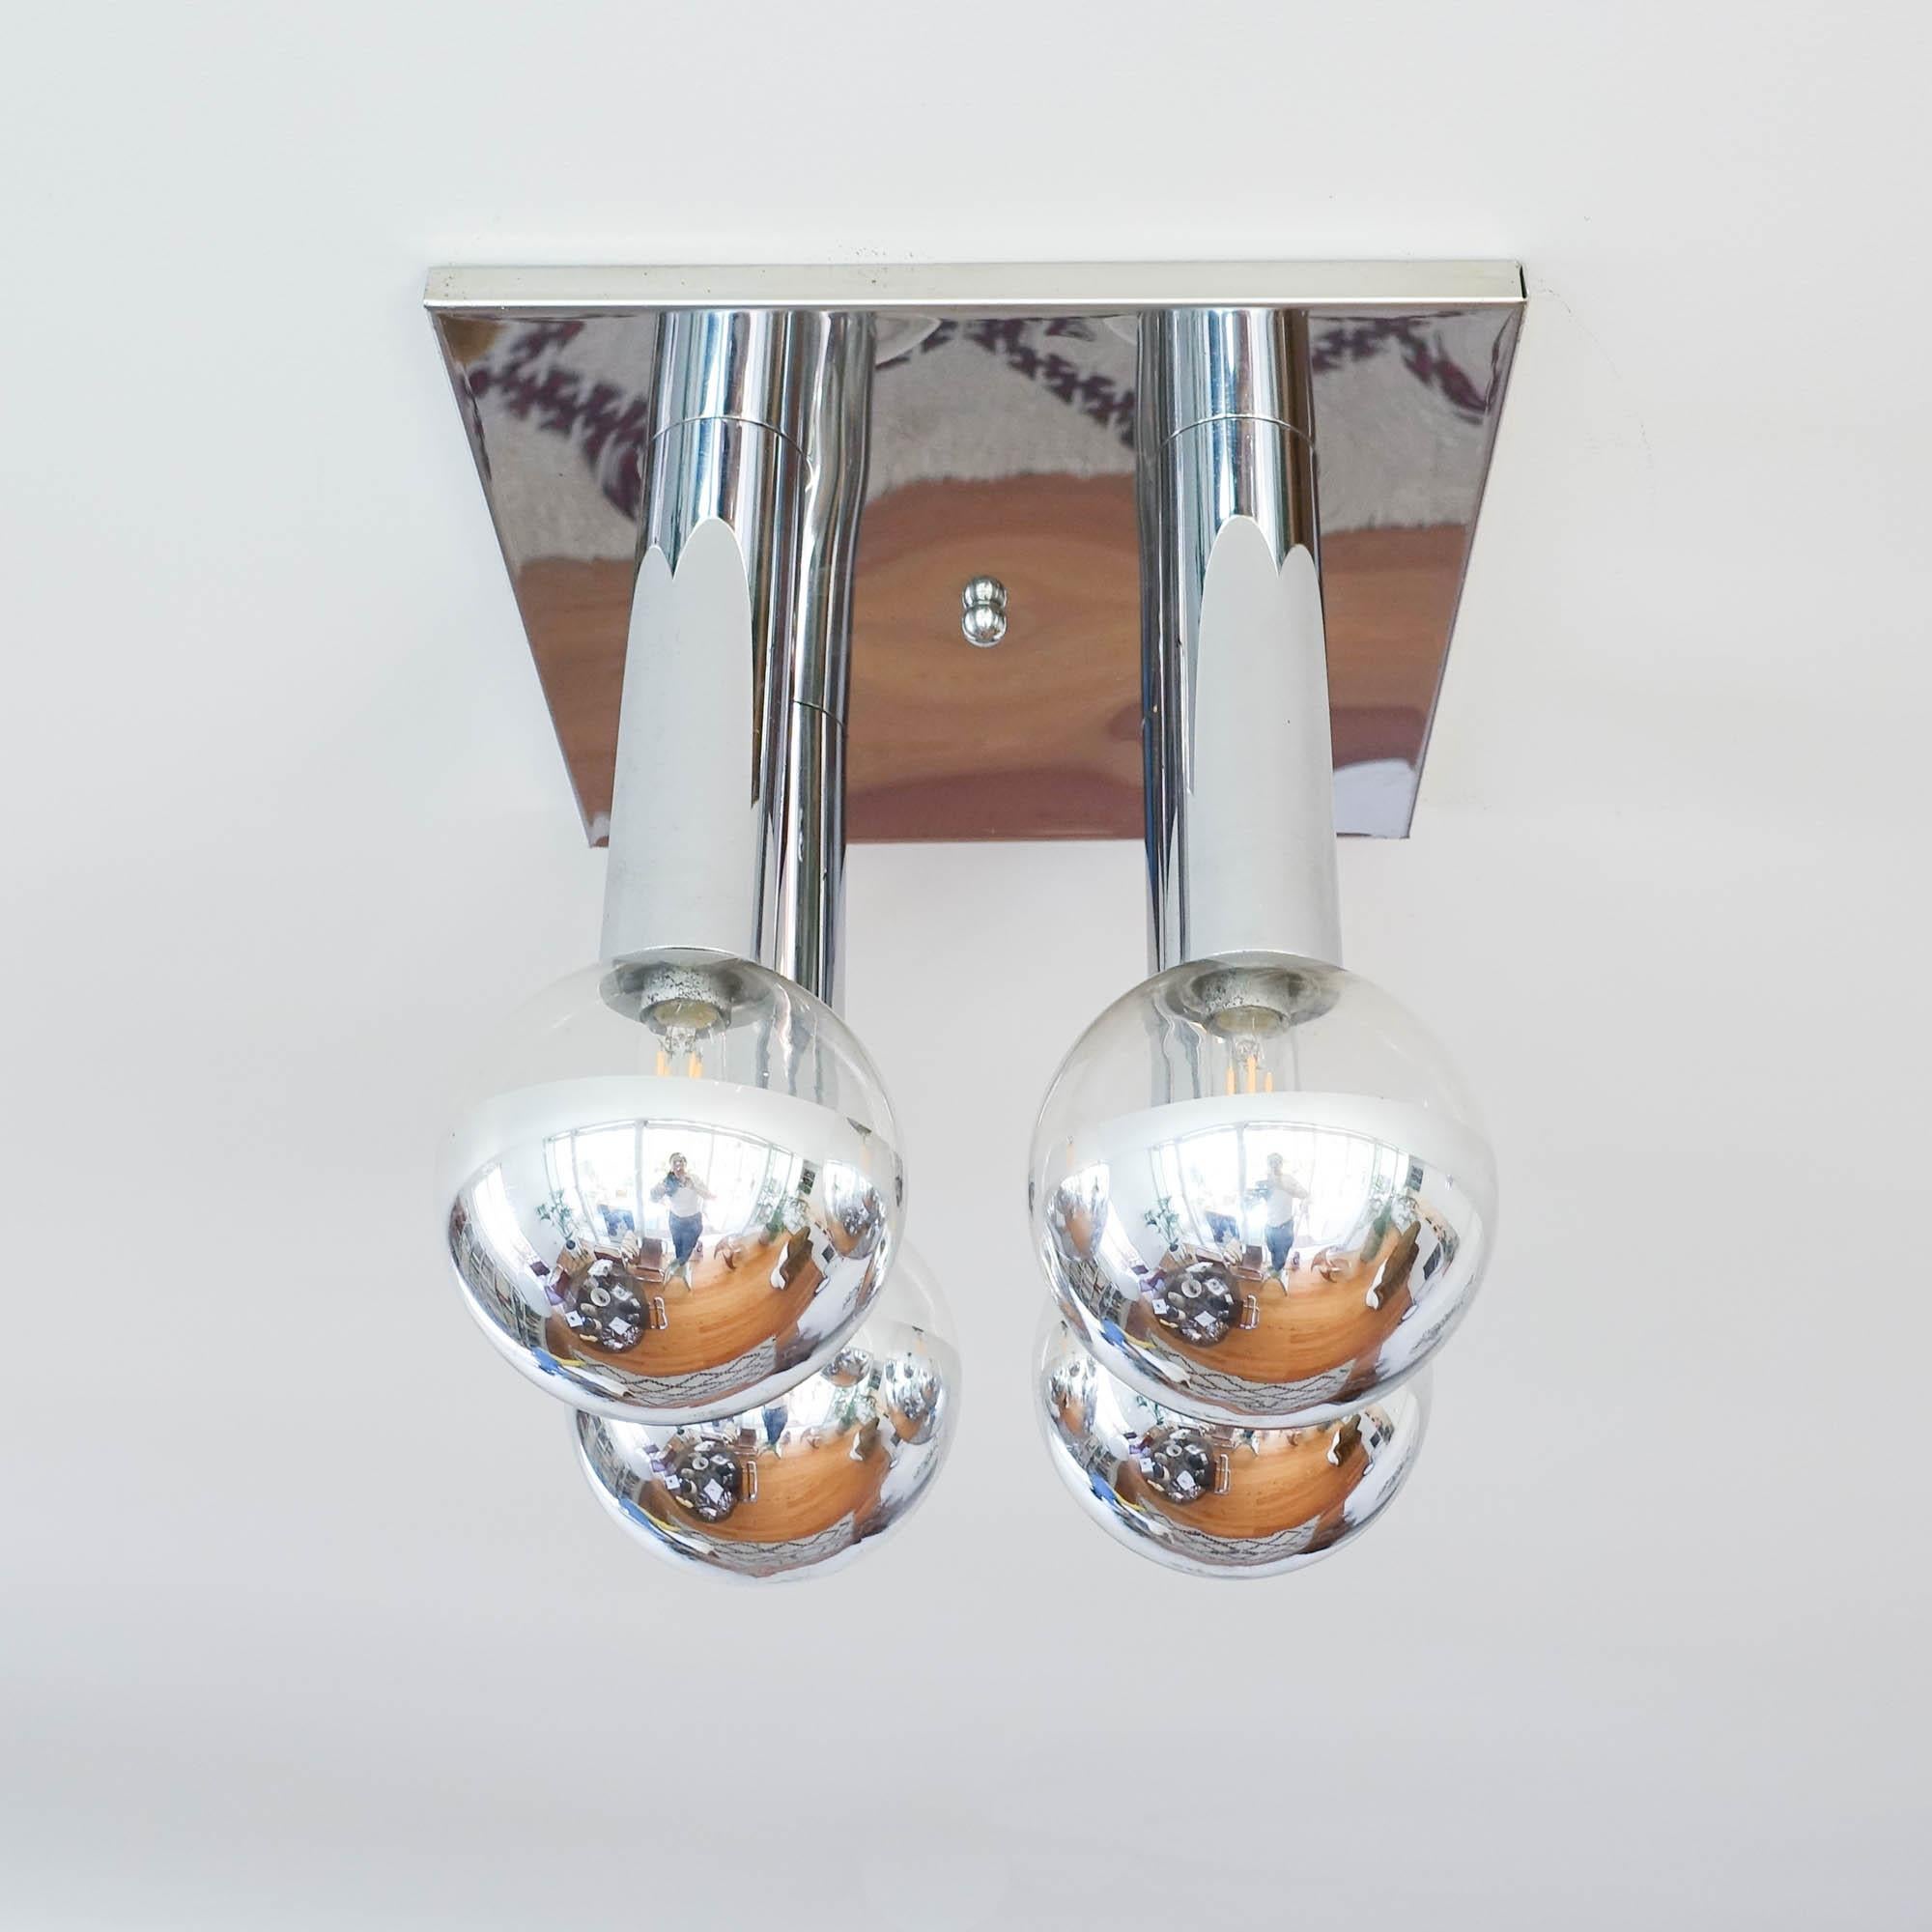 This ceiling lamp was designed by Motoko Ishii for Staff, in Germany, during the 1970's.
This design impresses with It's mirrored surfaces. Playing with reflections creates a special depth. The reflective surfaces double the elements and enhance